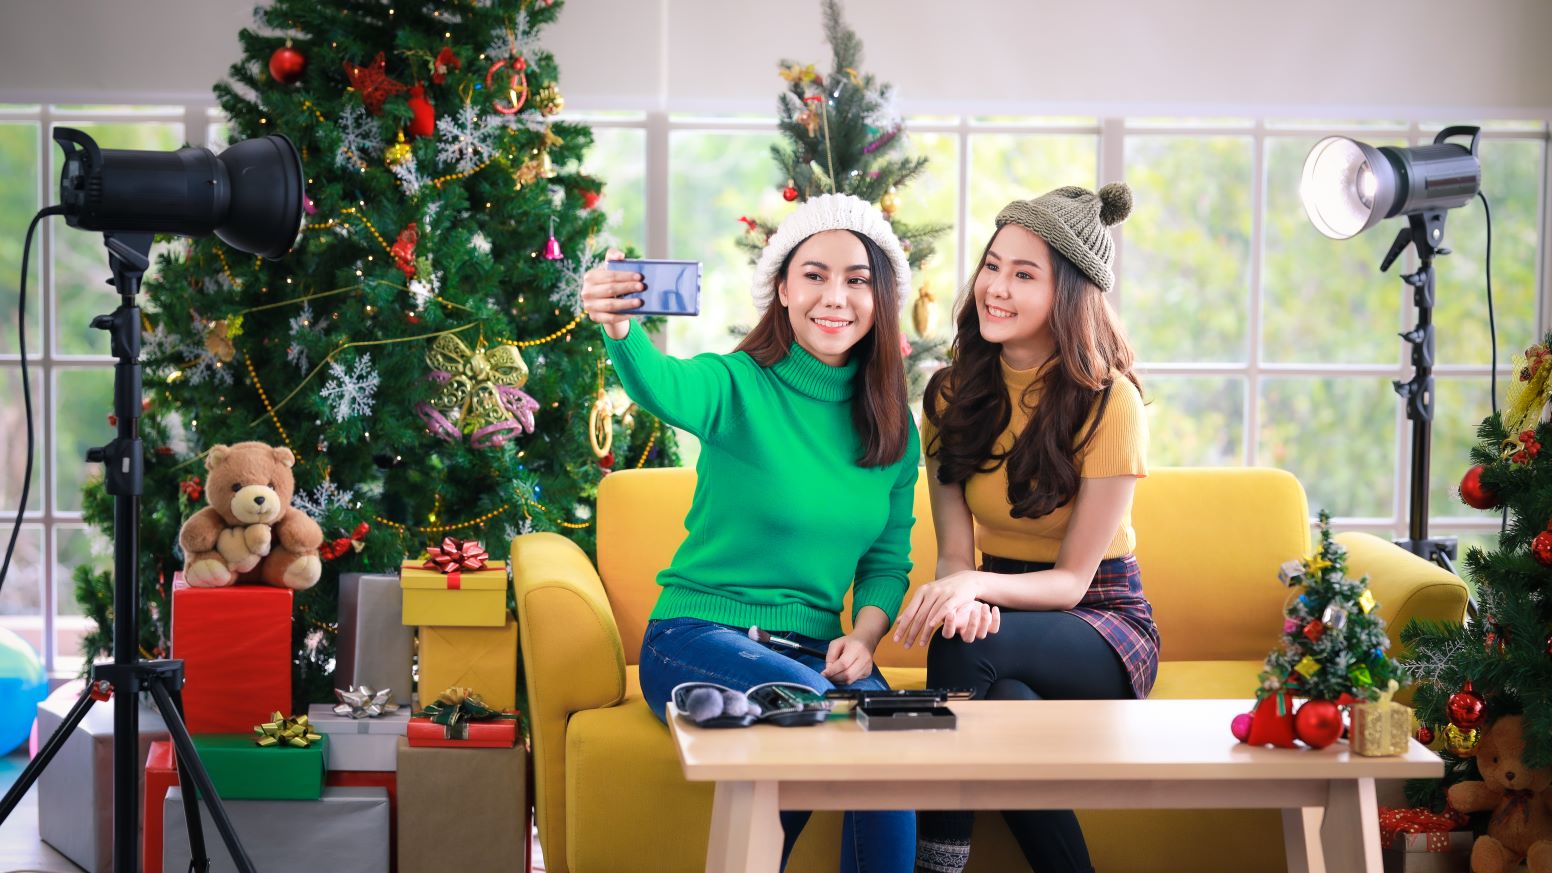 The Top 10 Christmas Gift Ideas For Influencers in 2021